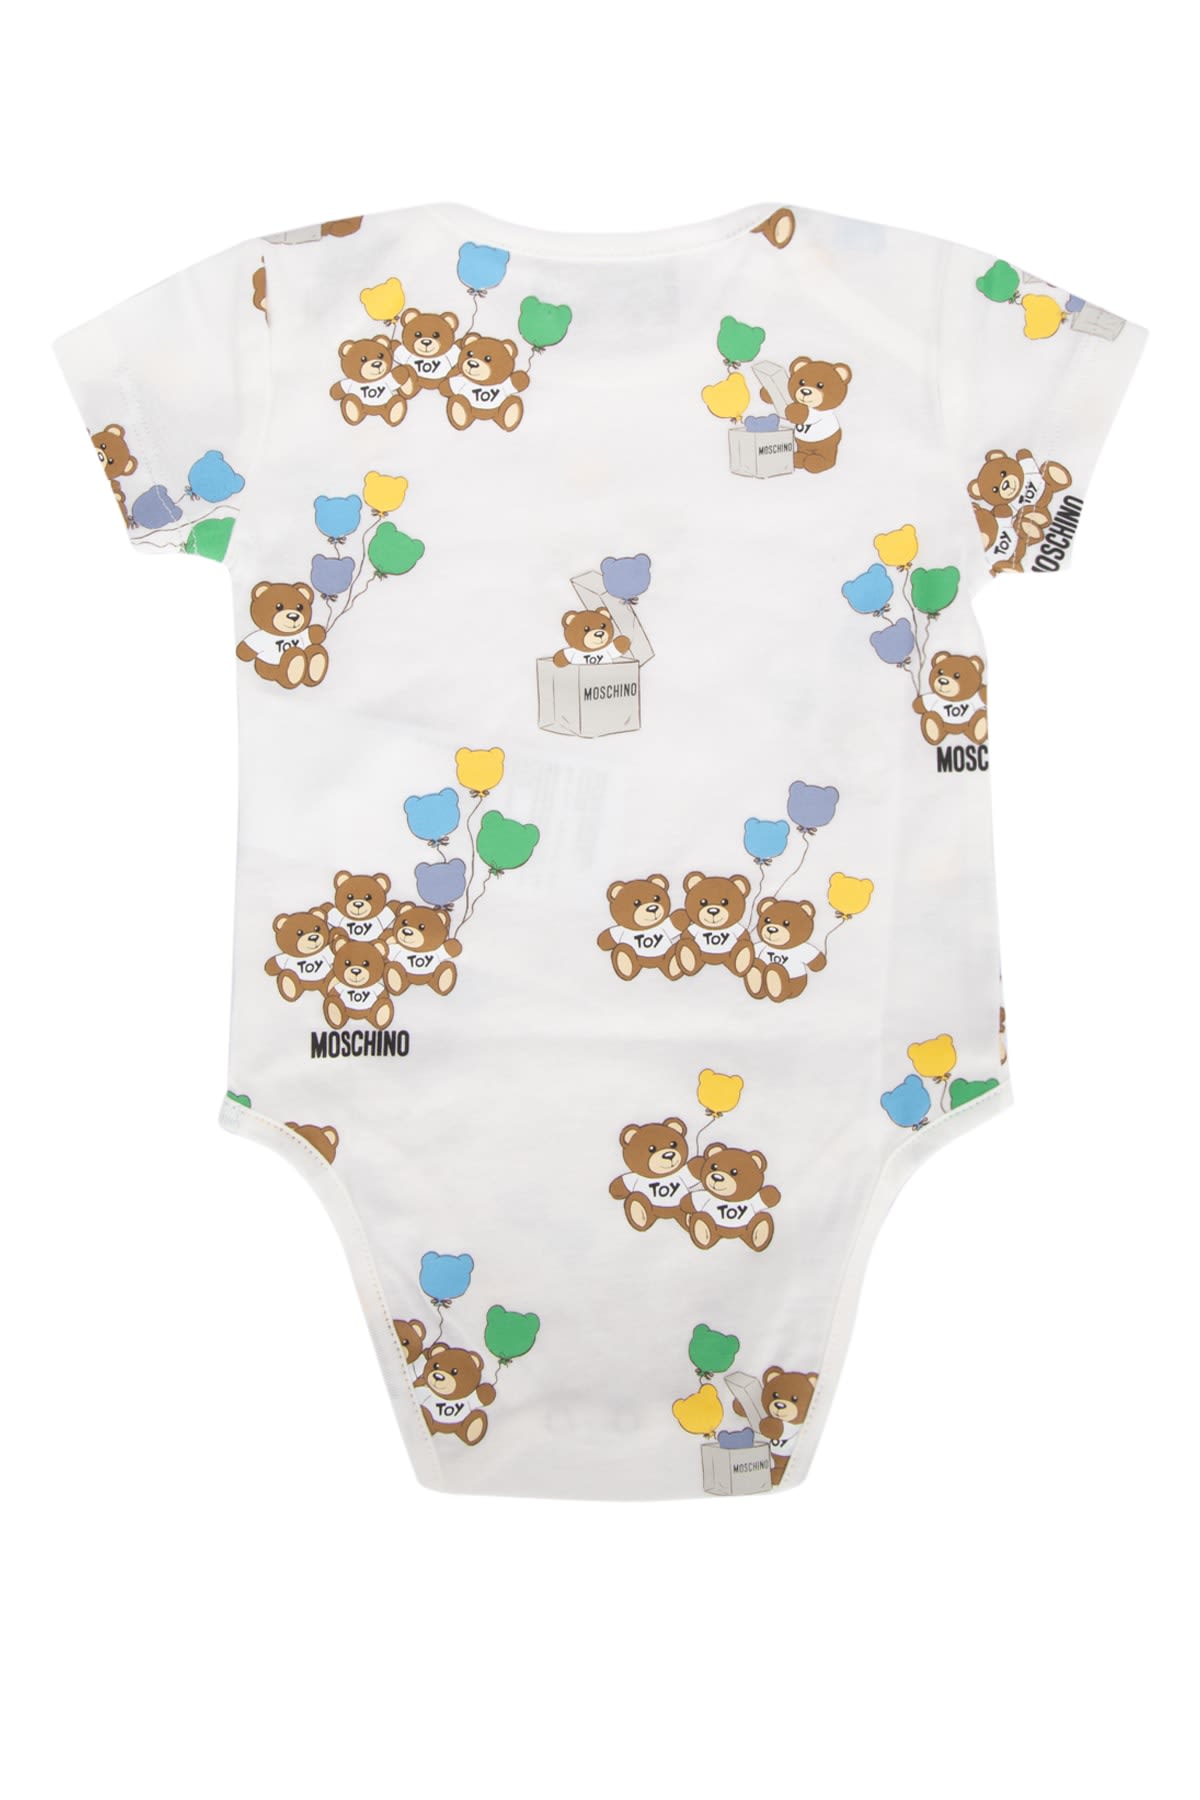 Moschino Babies' Intimo In Cloudtoyballoons